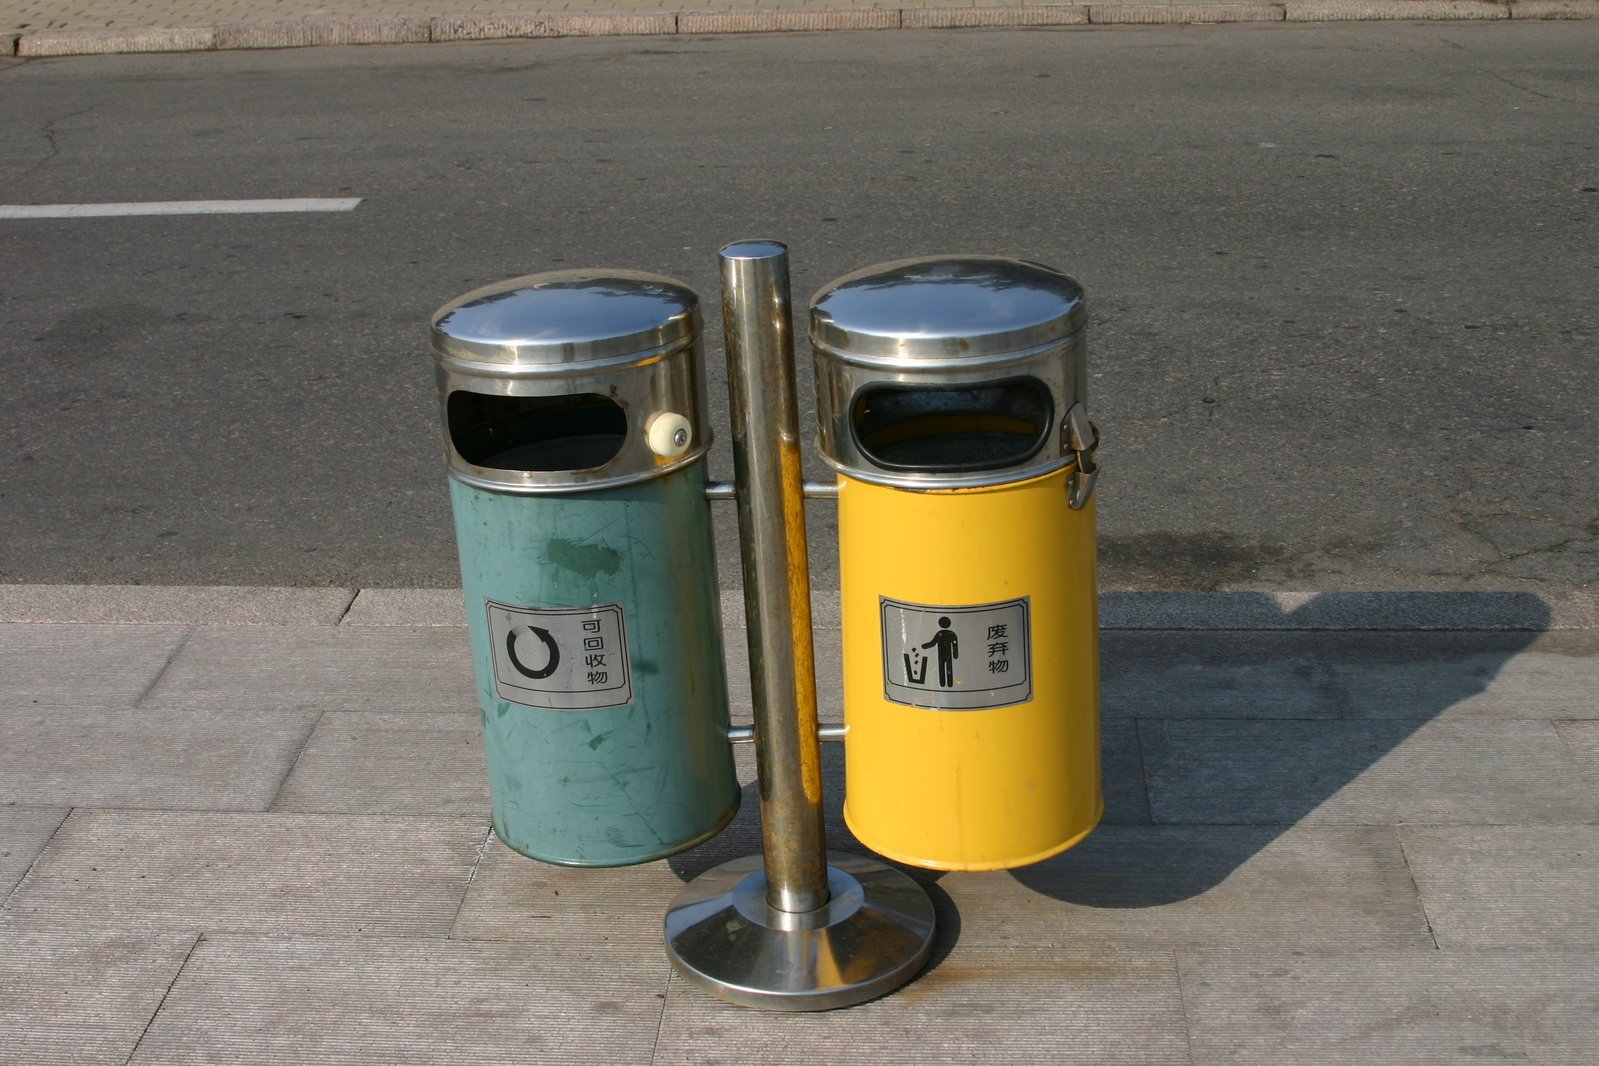 a pair of street trash cans sitting on the side of a road